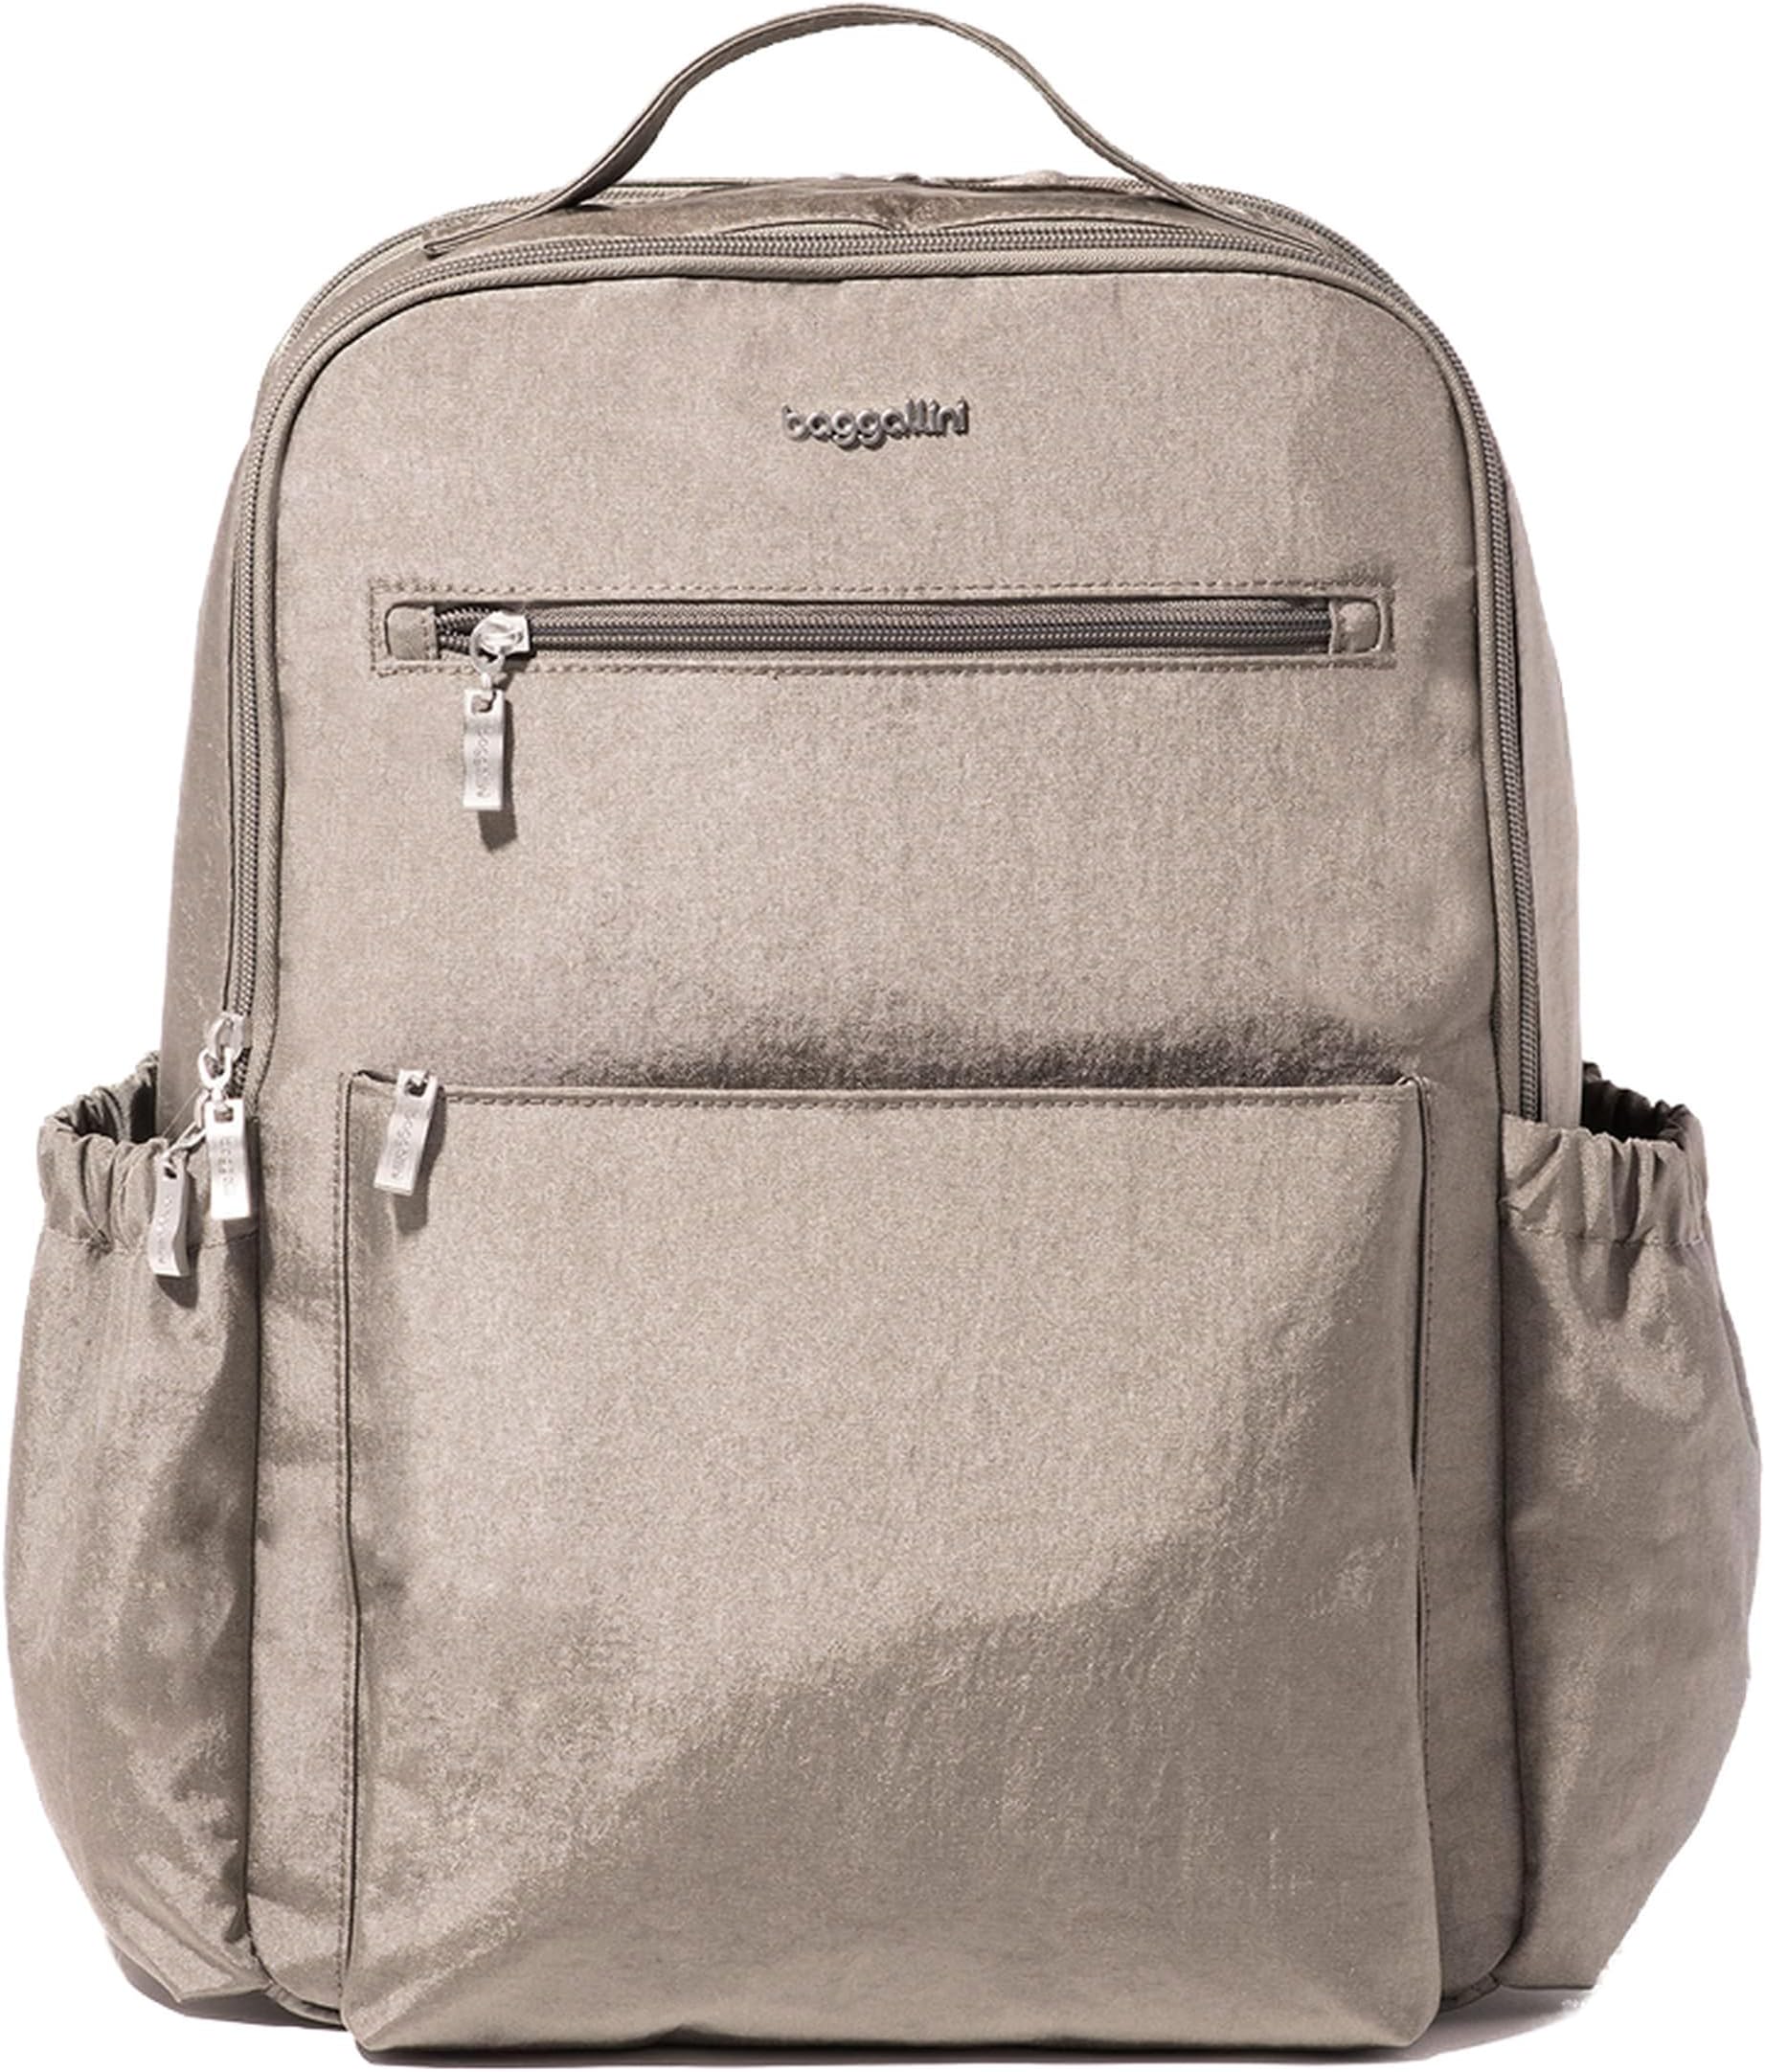 Рюкзак Tribeca Expandable Laptop Backpack Baggallini, цвет Sterling Shimmer